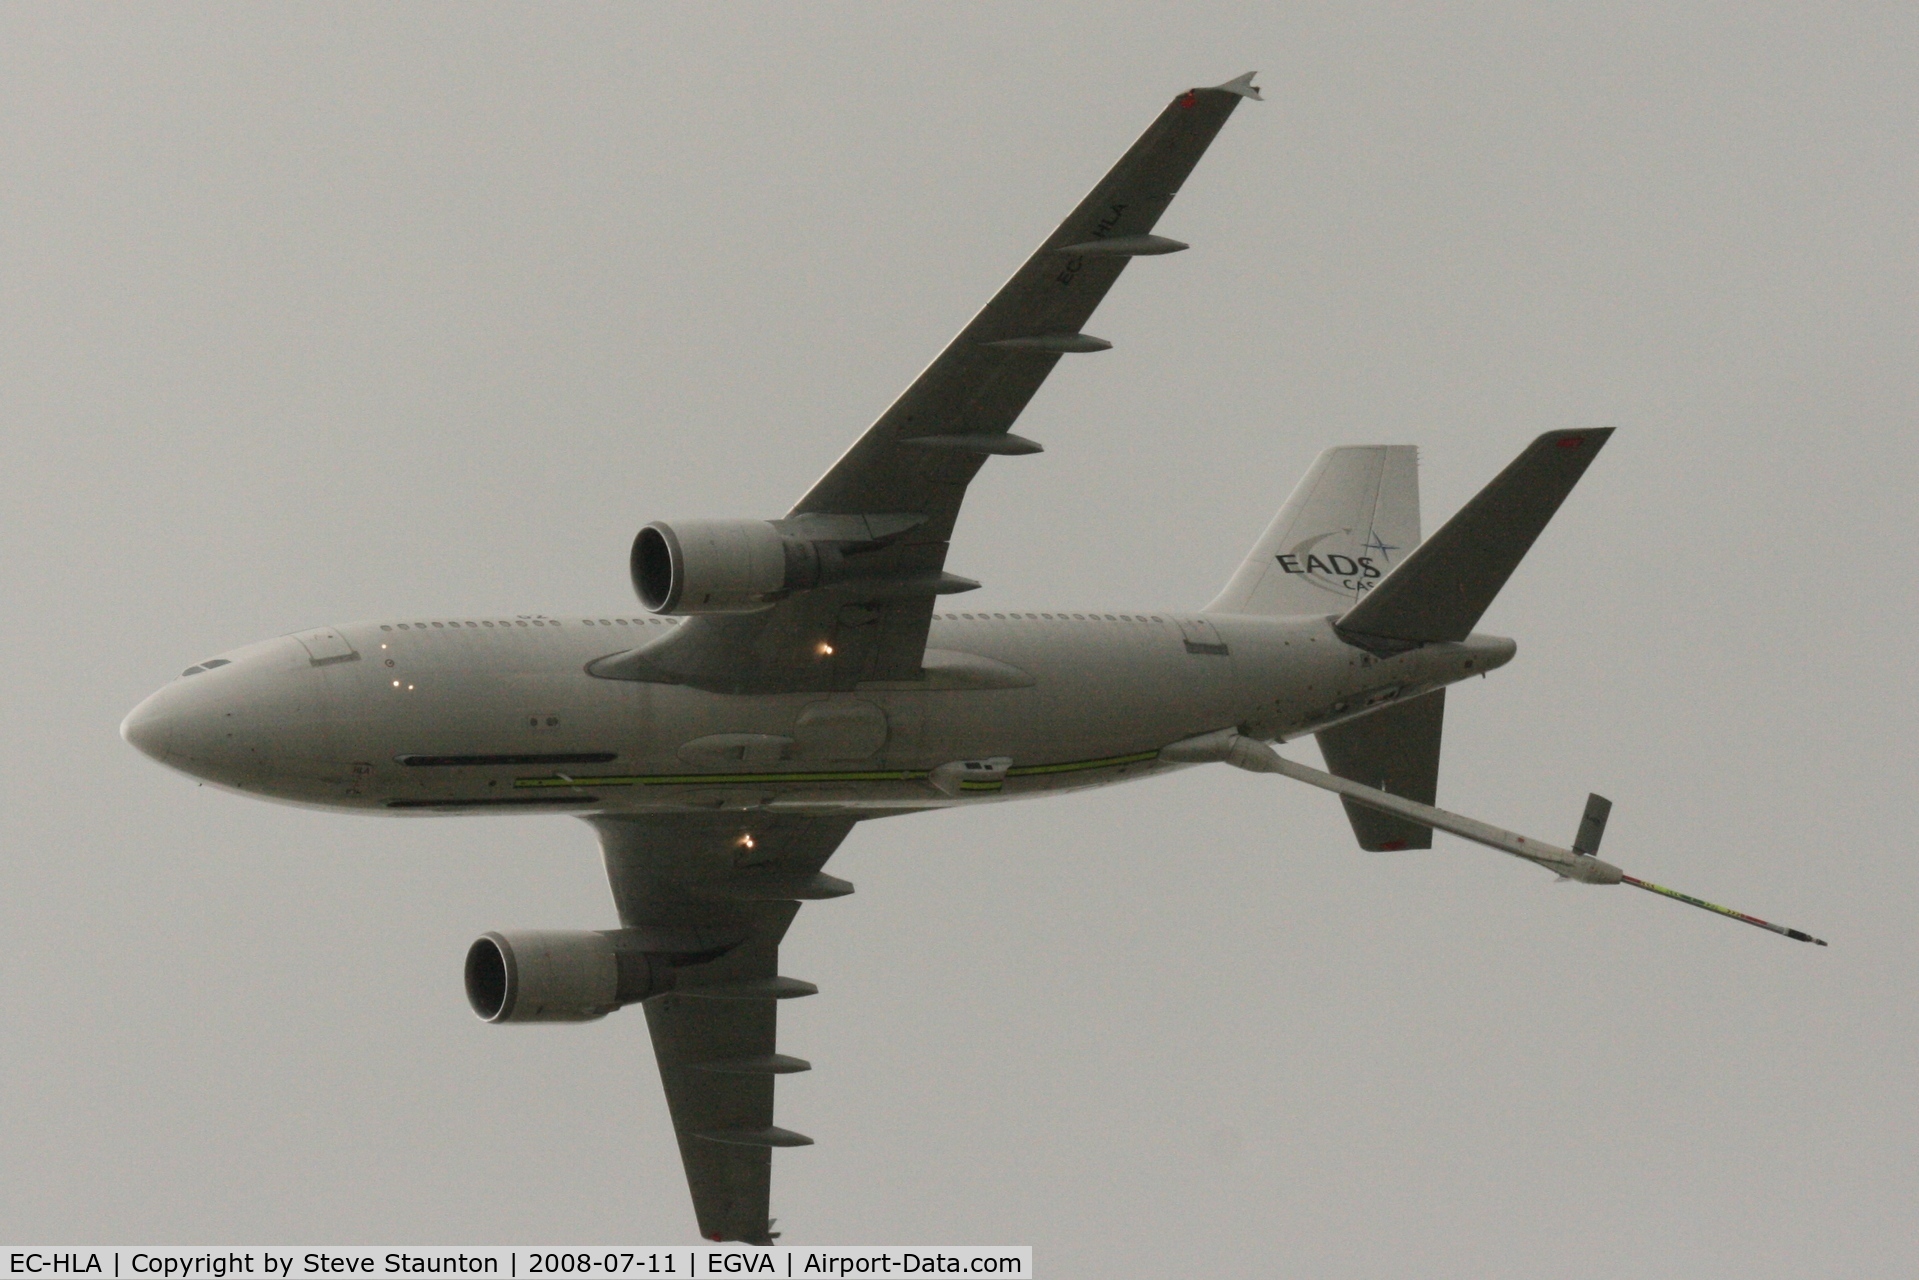 EC-HLA, Airbus A310-324/MRTT C/N 489, Taken at the Royal International Air Tattoo 2008 during arrivals and departures (show days cancelled due to bad weather)